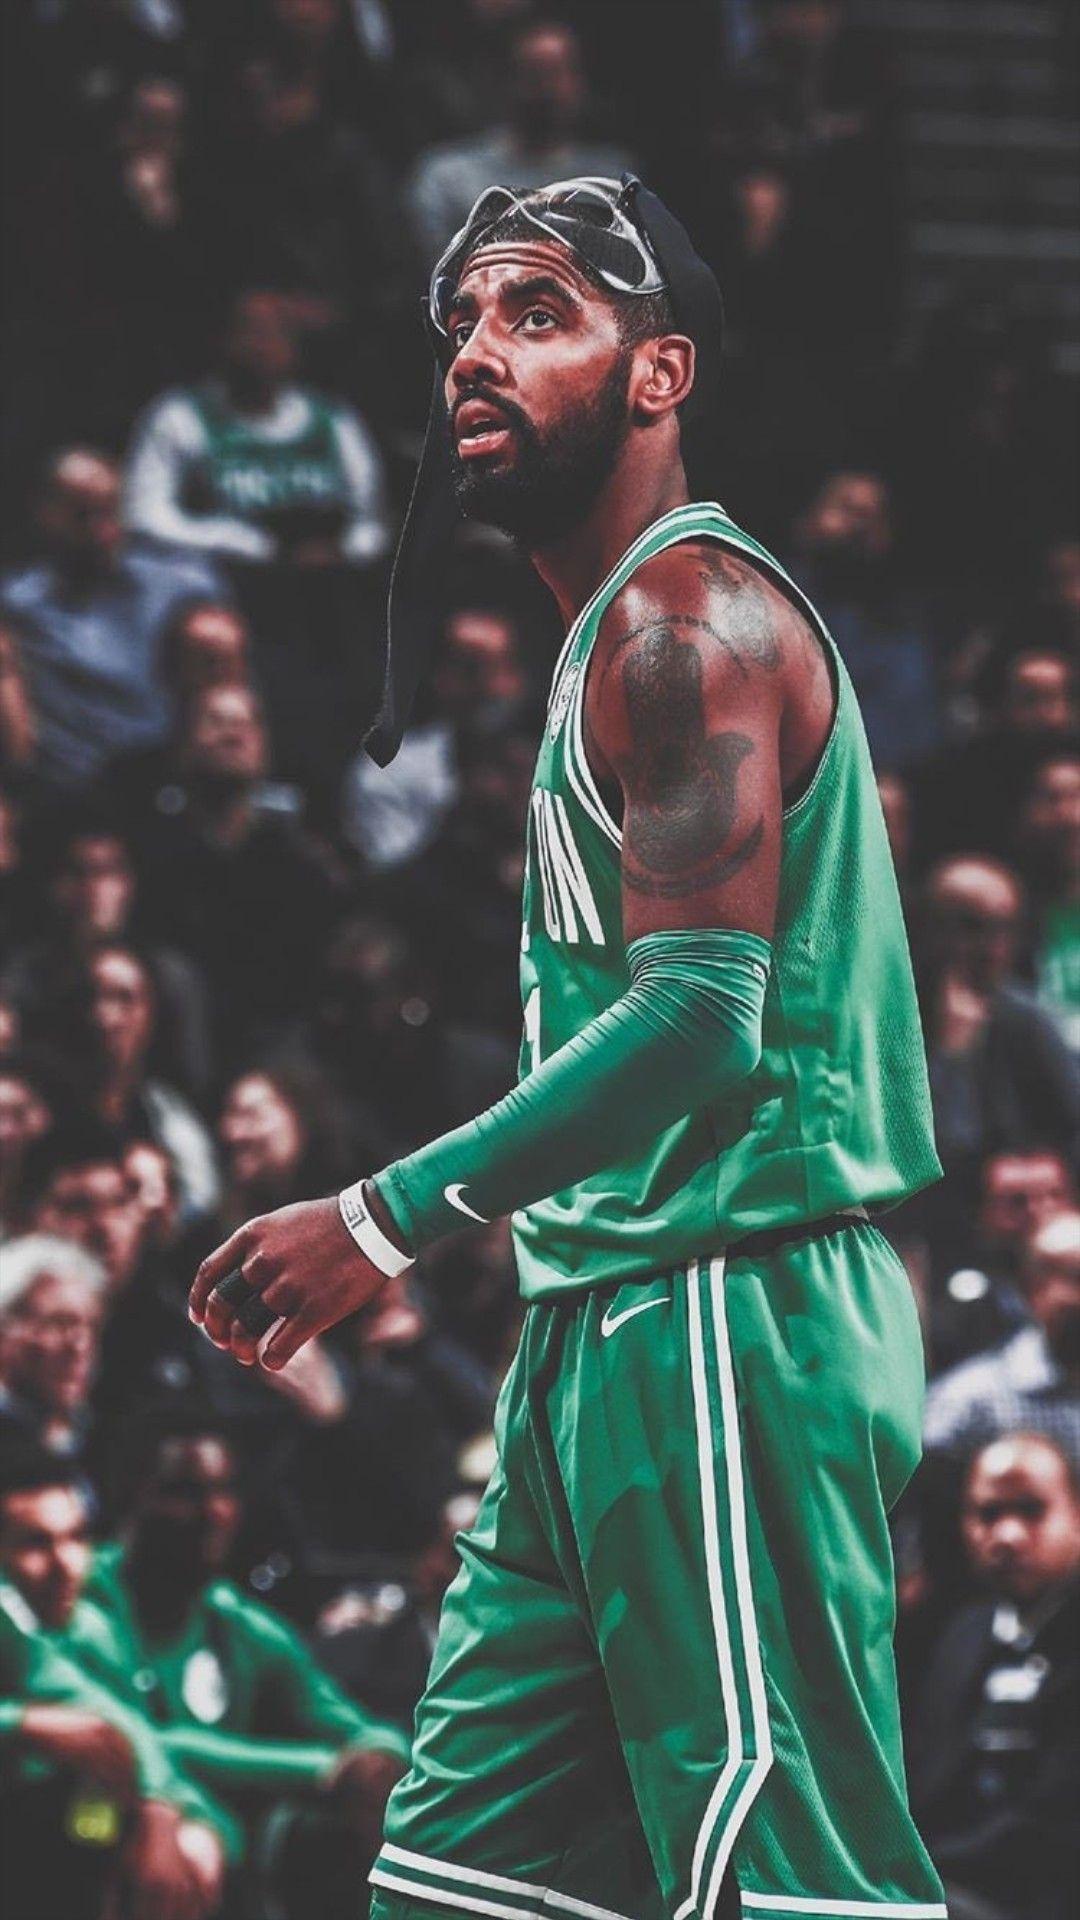 Kyrie iPhone Wallpapers - Top Free Kyrie iPhone Backgrounds ...